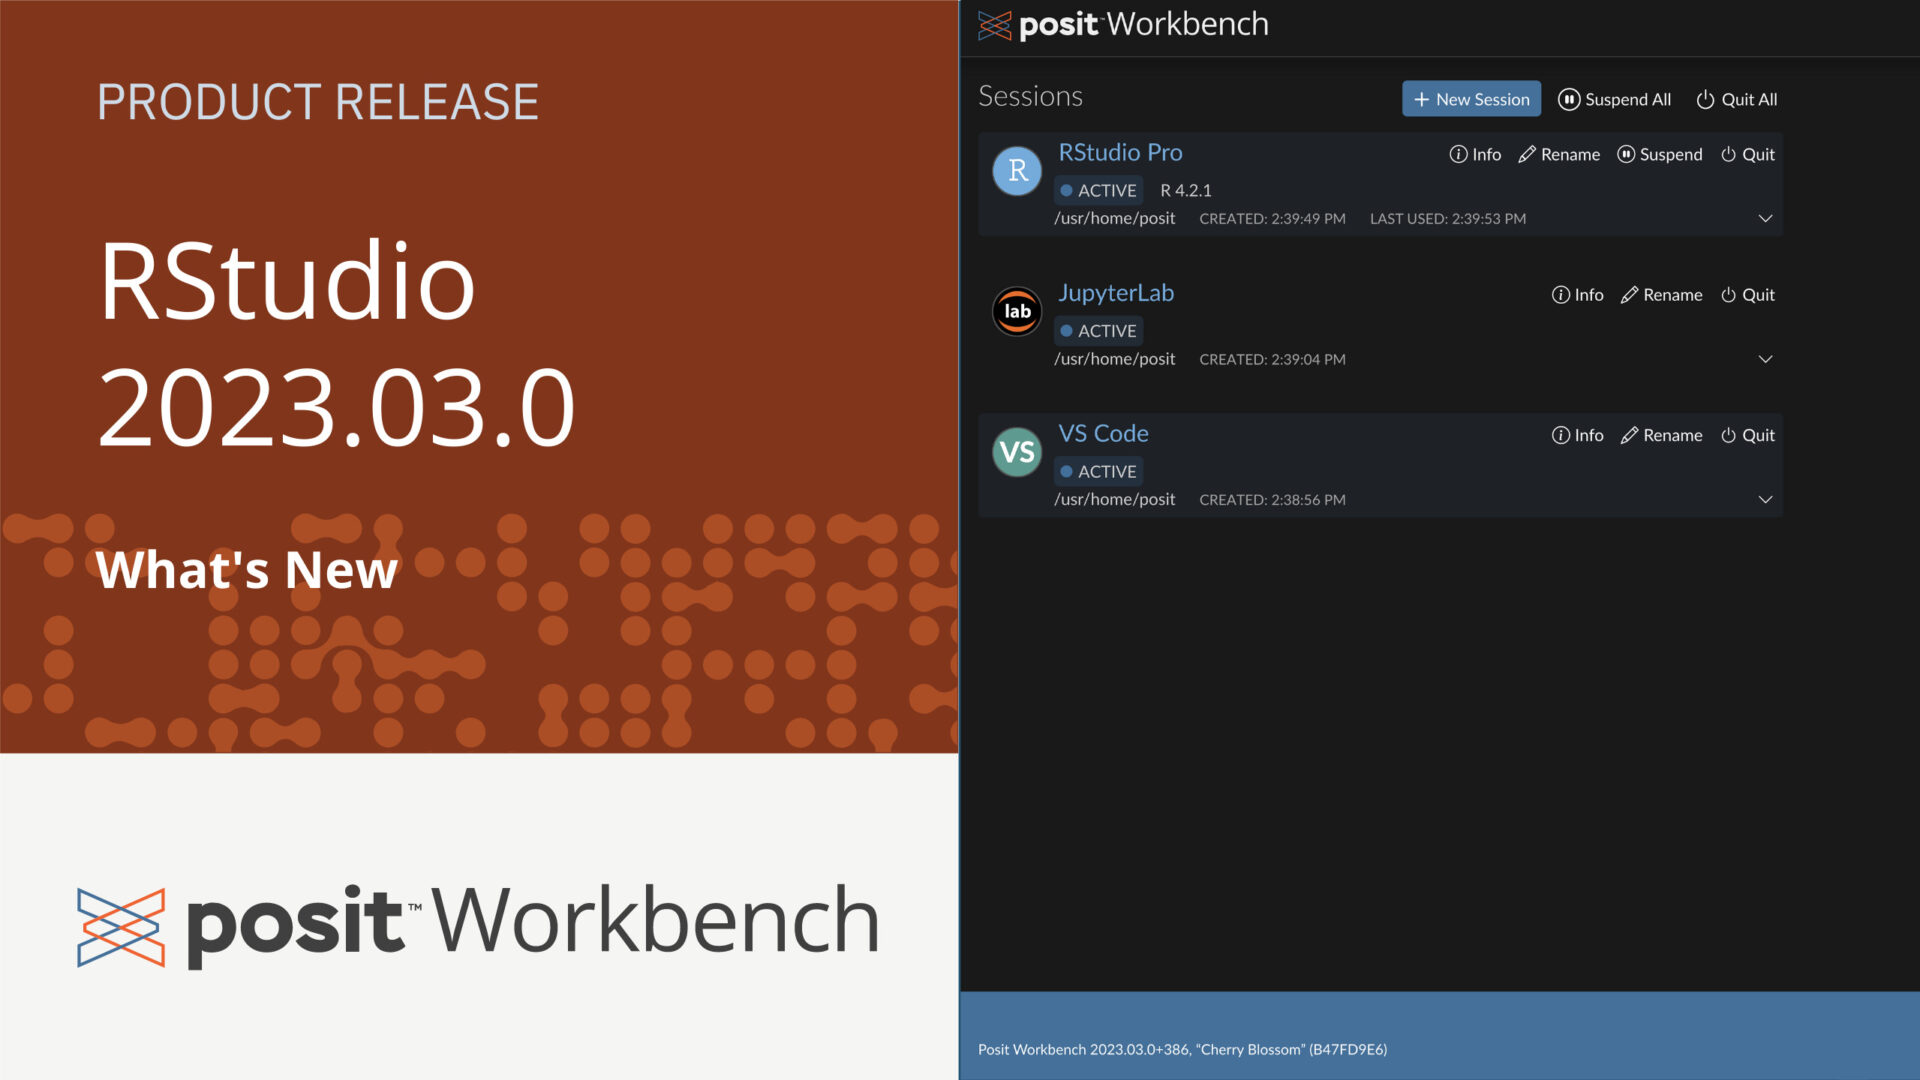 Text: "RStudio 2023.03.0 What's New Posit Workbench". The Posit Workbench logo and a screenshot of Workbench with three projects open is shown.